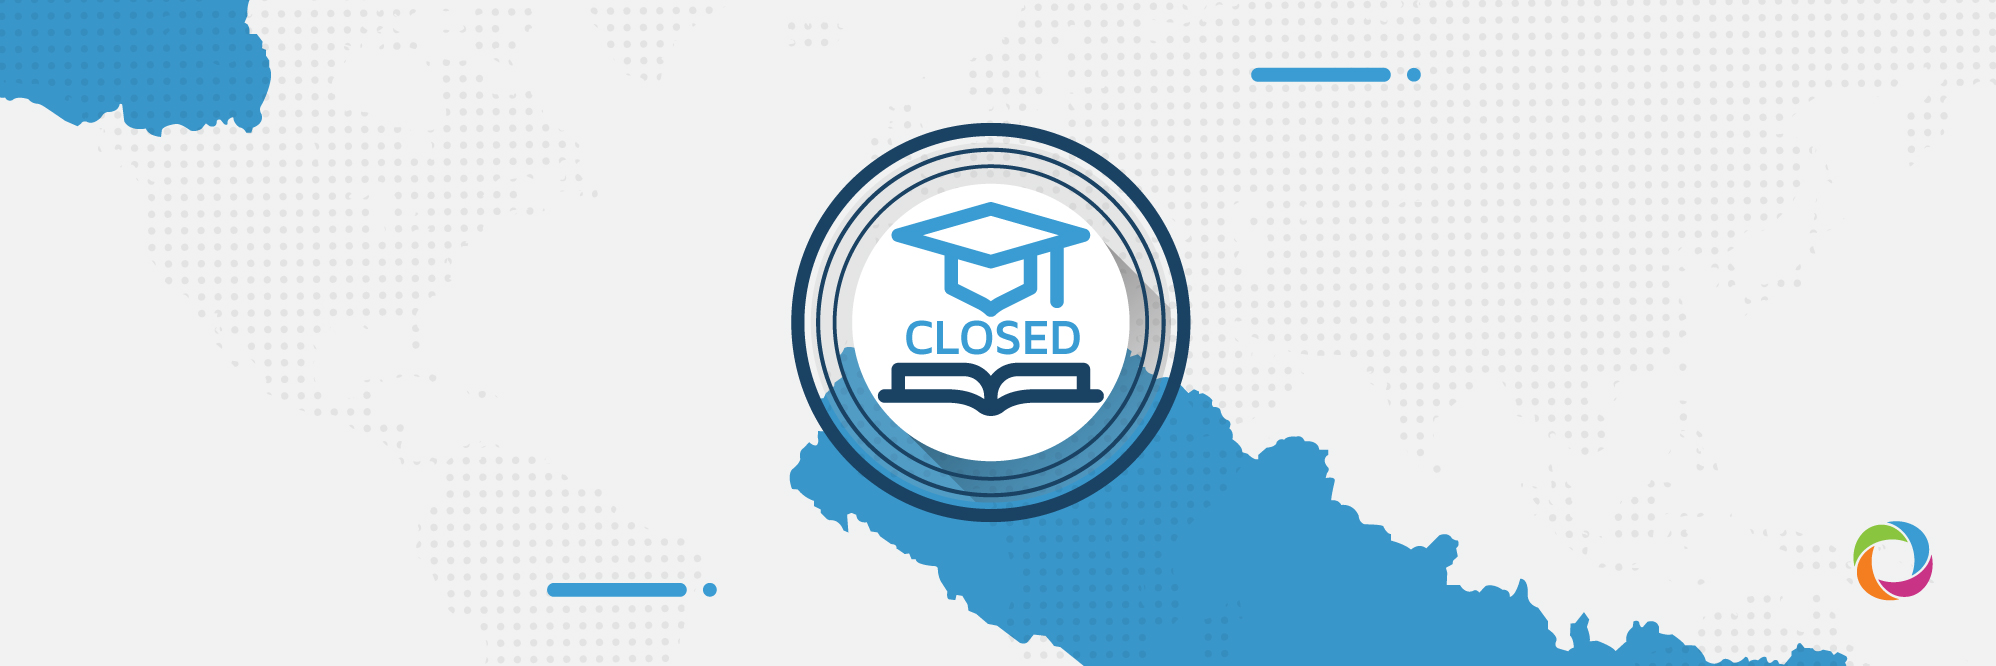 Government of Nepal closes schools due to deteriorating air quality